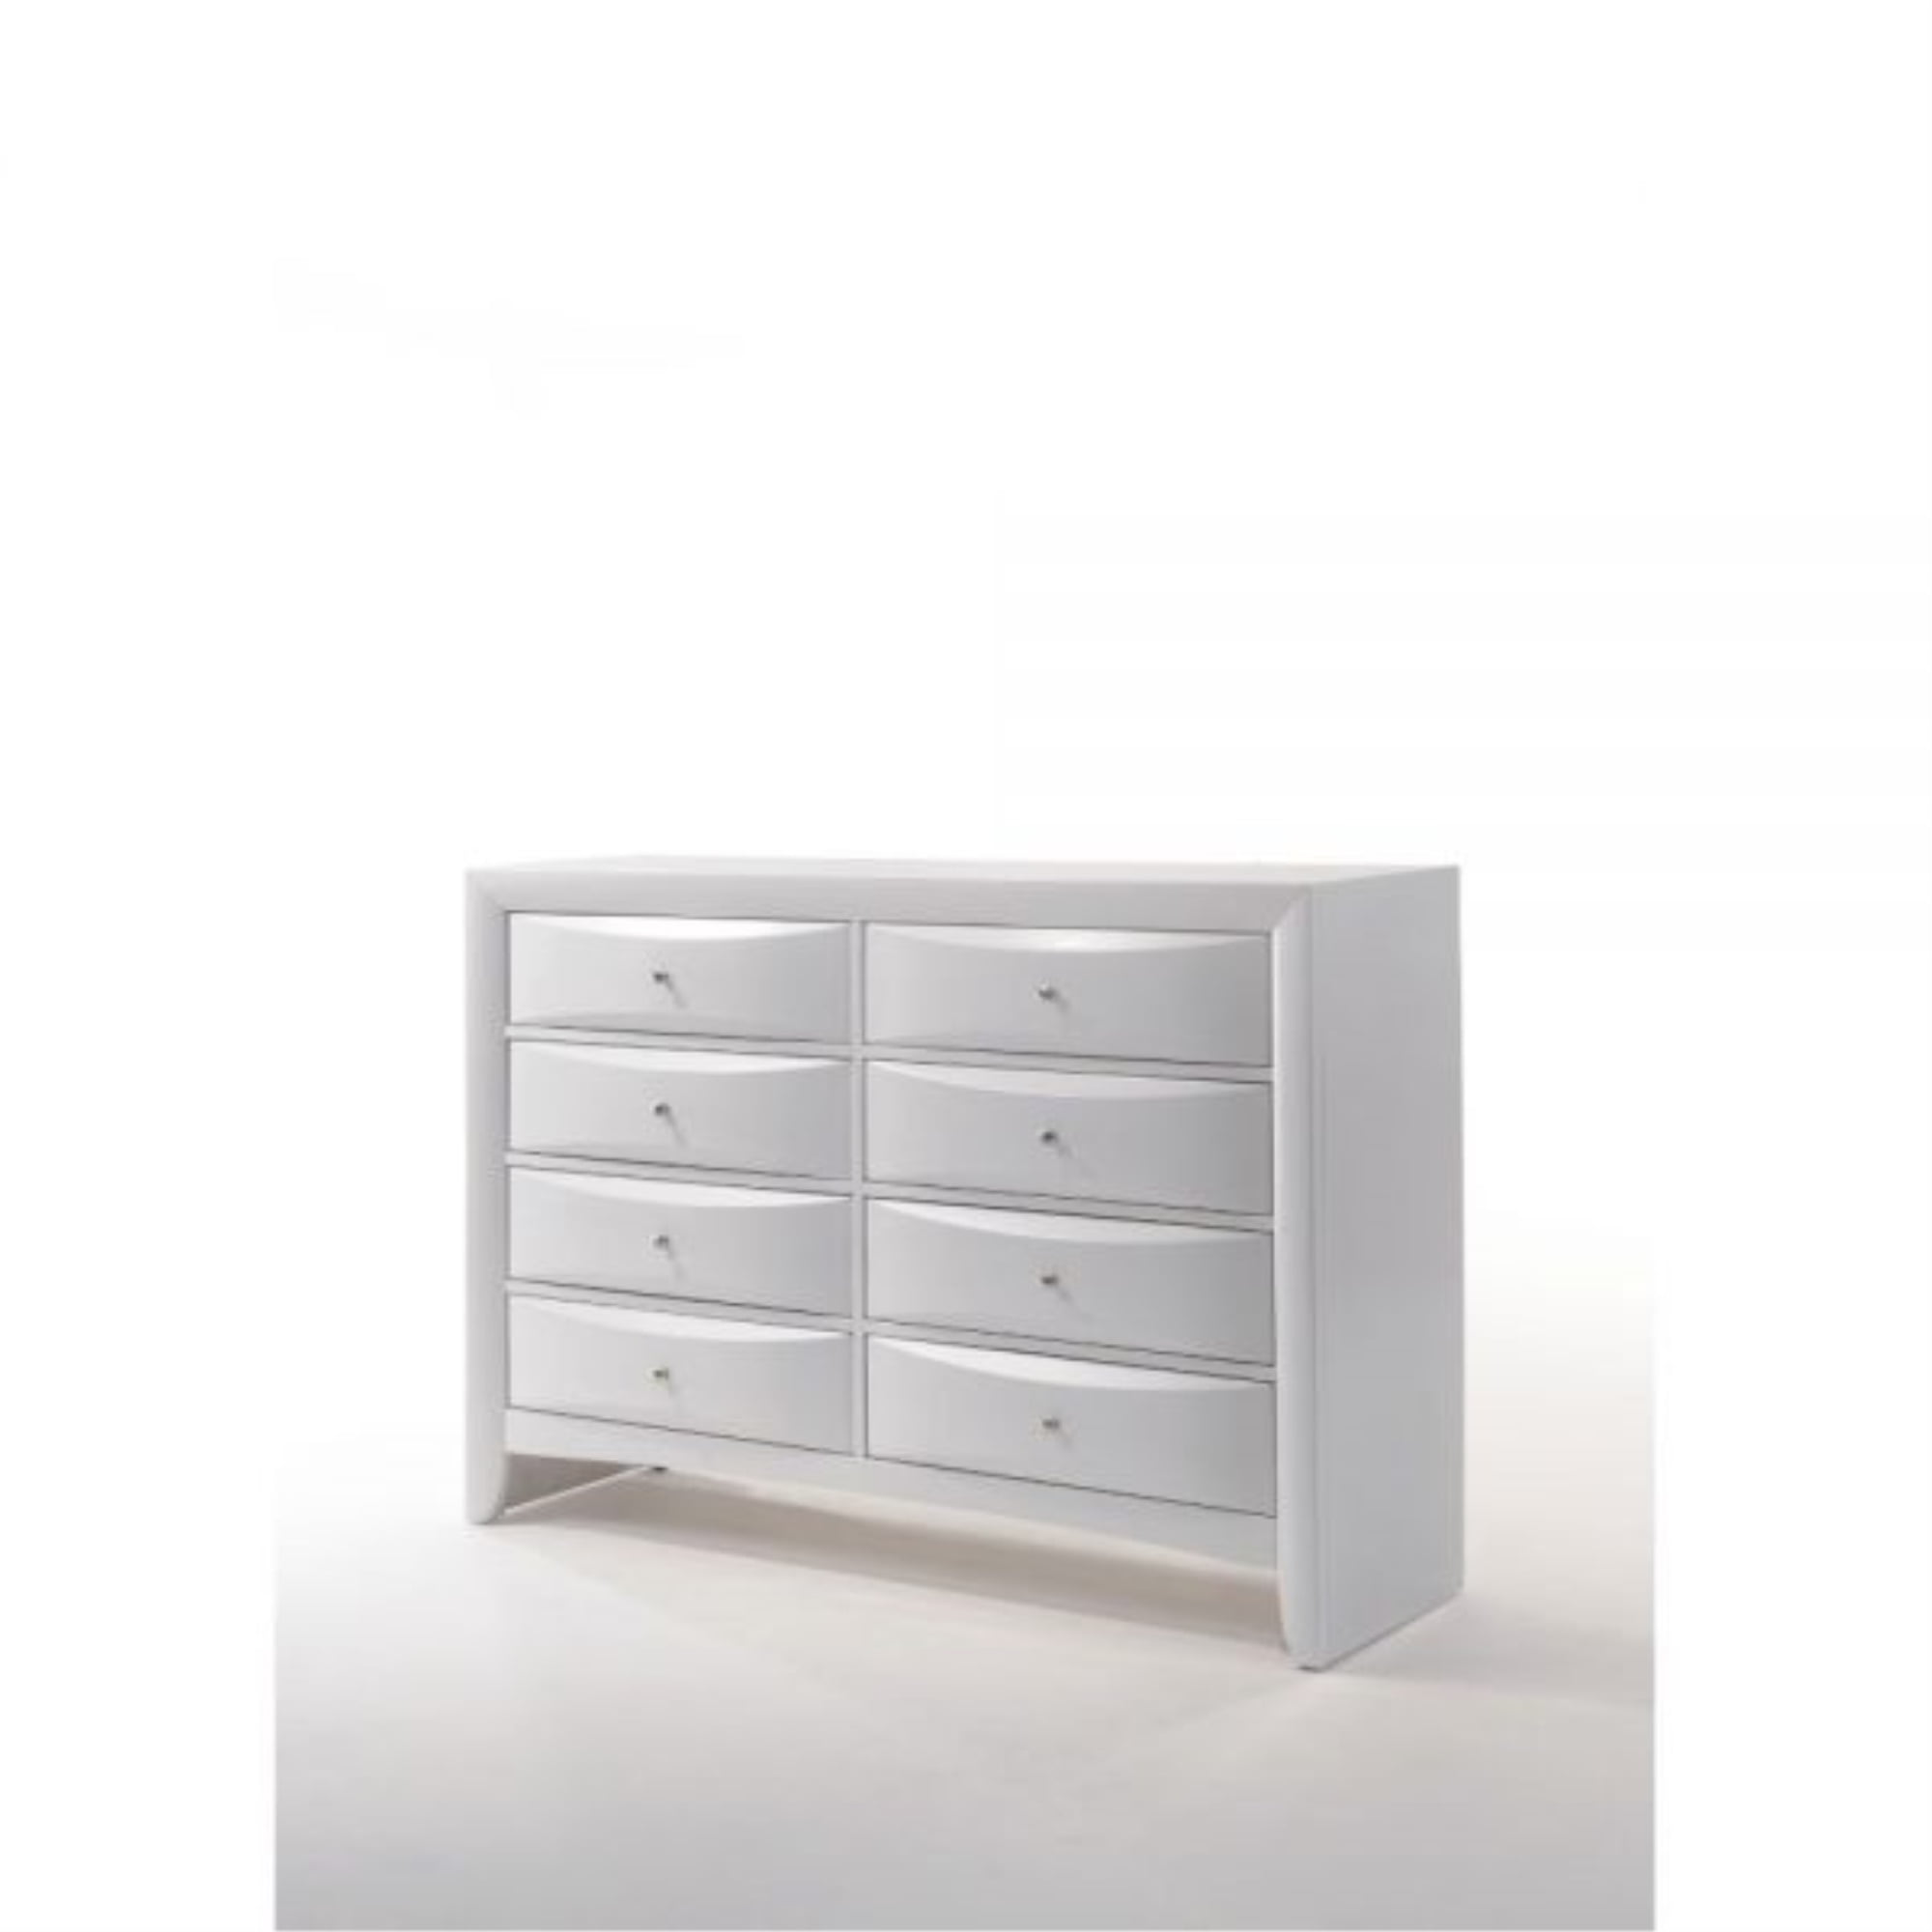 Picture of ACME 21706 Ireland Dresser - White - 41 x 59 x 17 in.